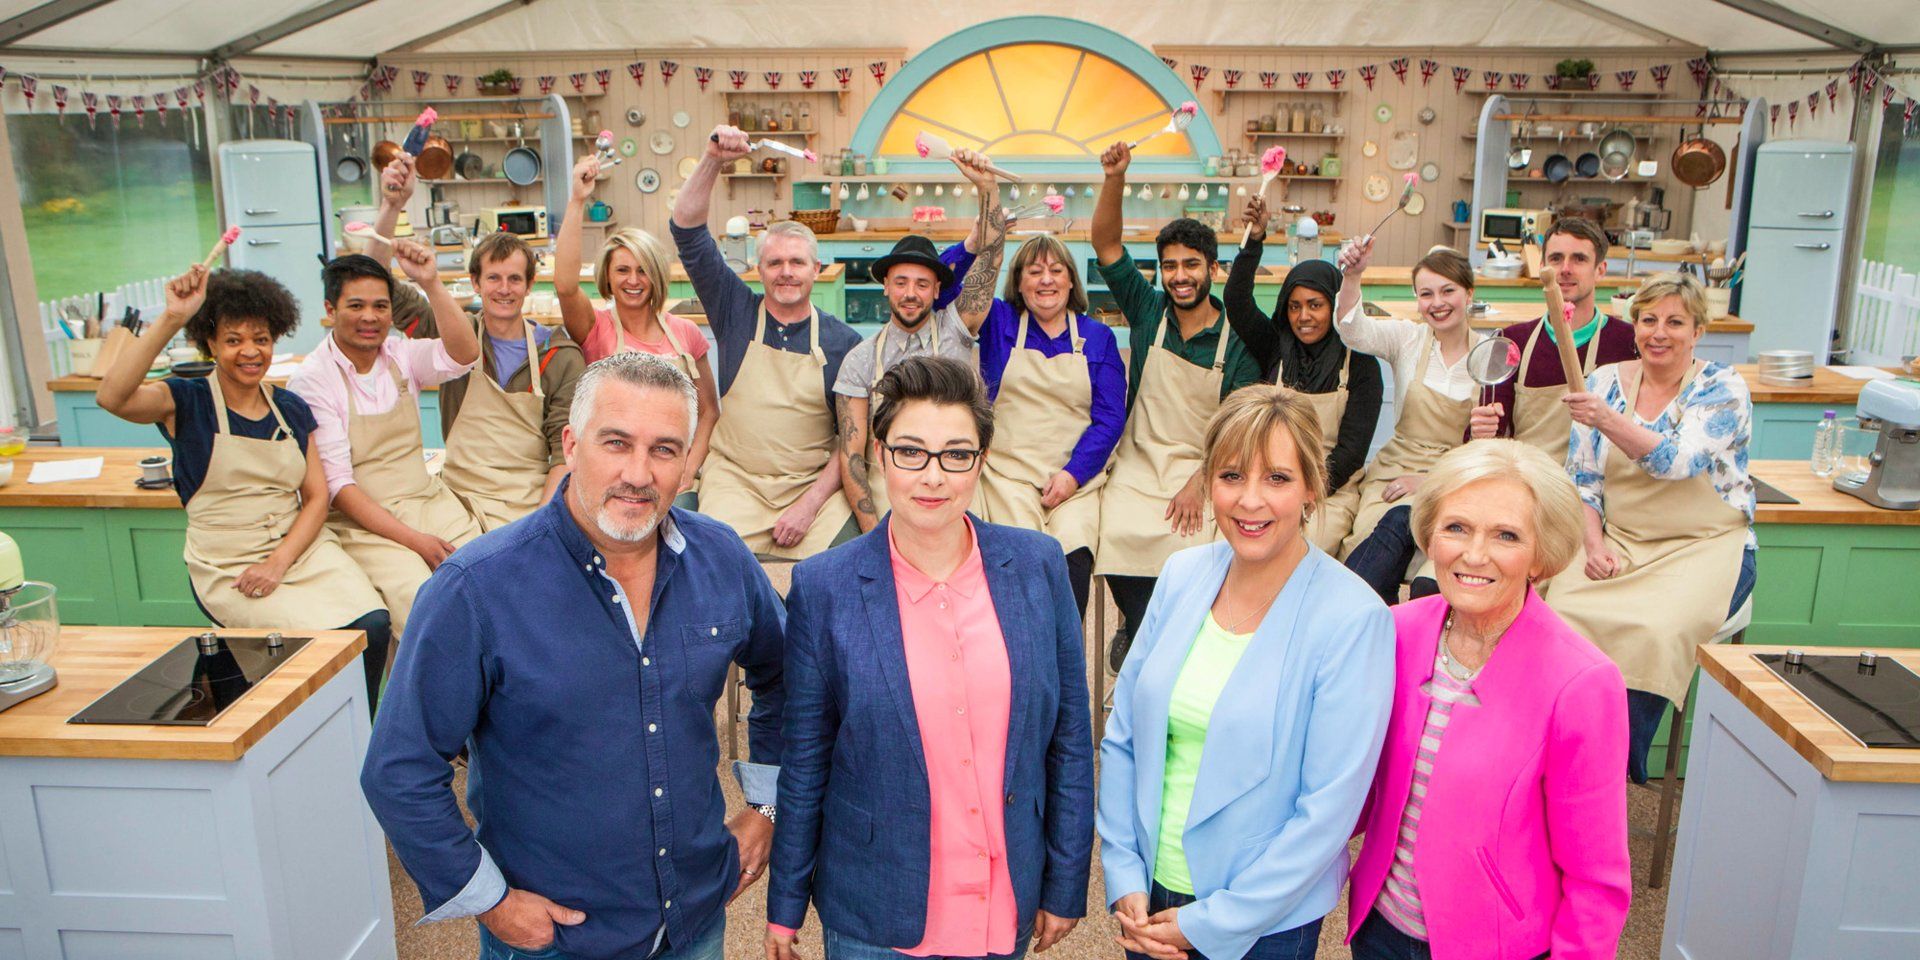 The Great British Bake Off's cat and contestants from one season all posing for the camera.